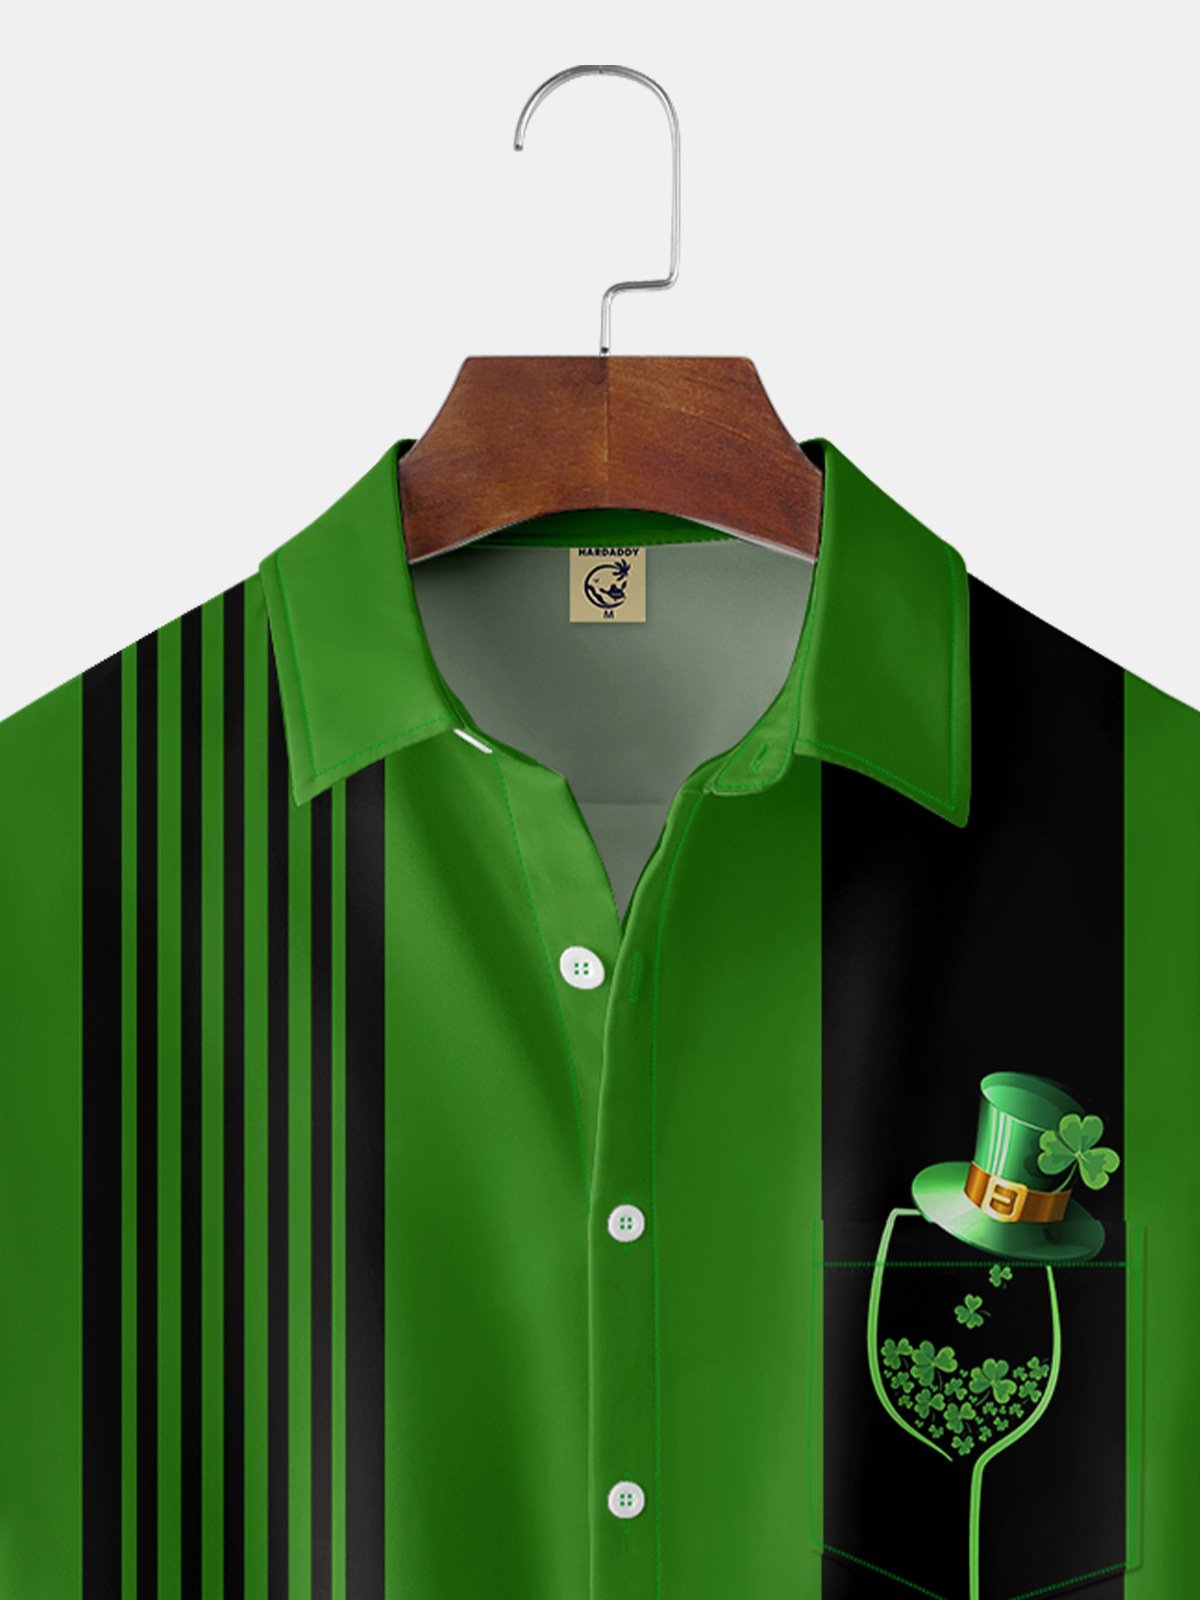 Hardaddy Hawaiian Button Up Shirt for Men Green And Black St. Patrick's Day Clover Wine Regular Fit Short Sleeve Bowling Shirt St Paddy's Day Shirt